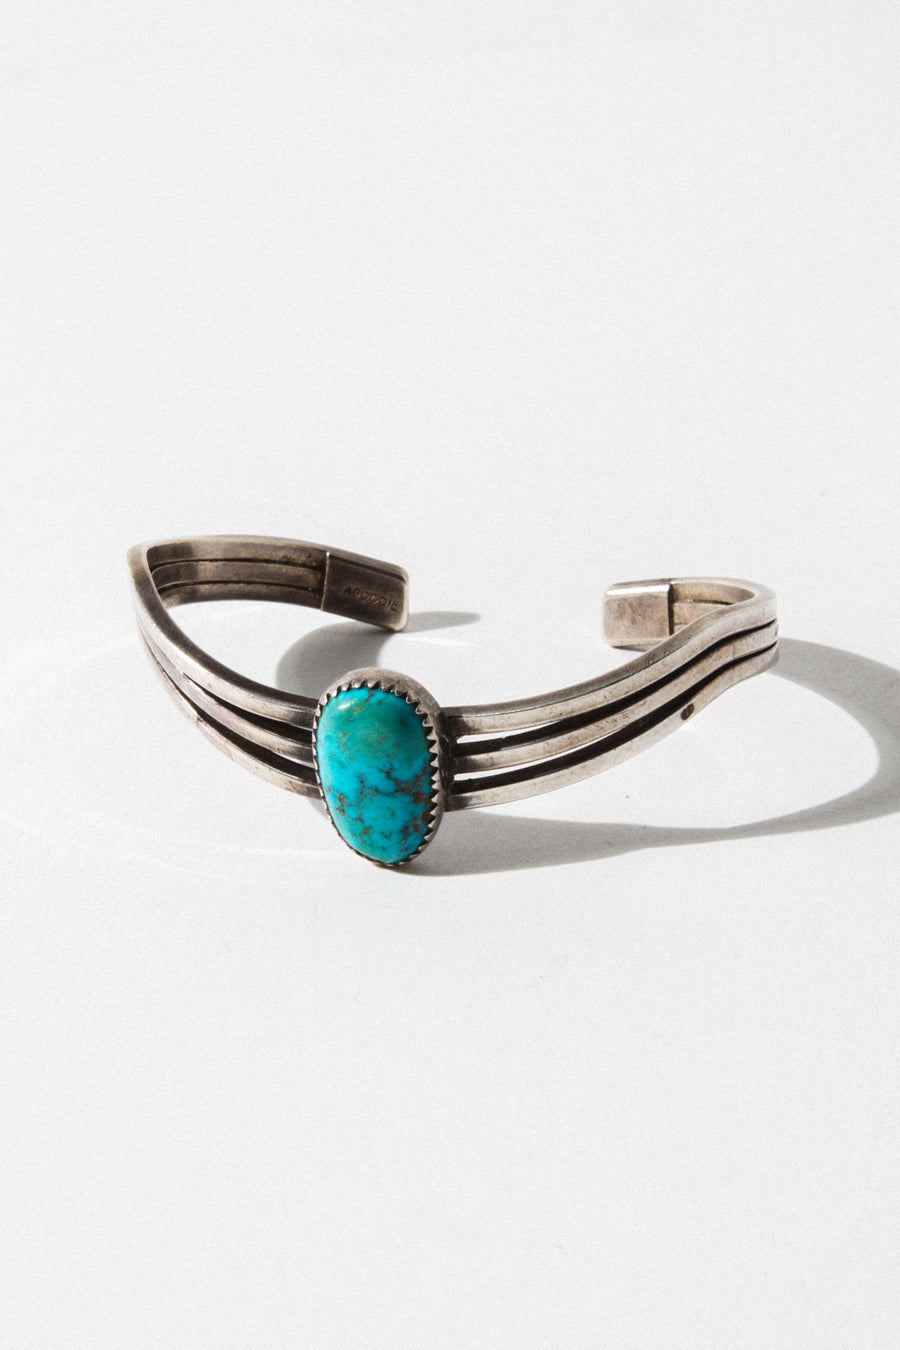 California Dreaming Turquoise Cuff